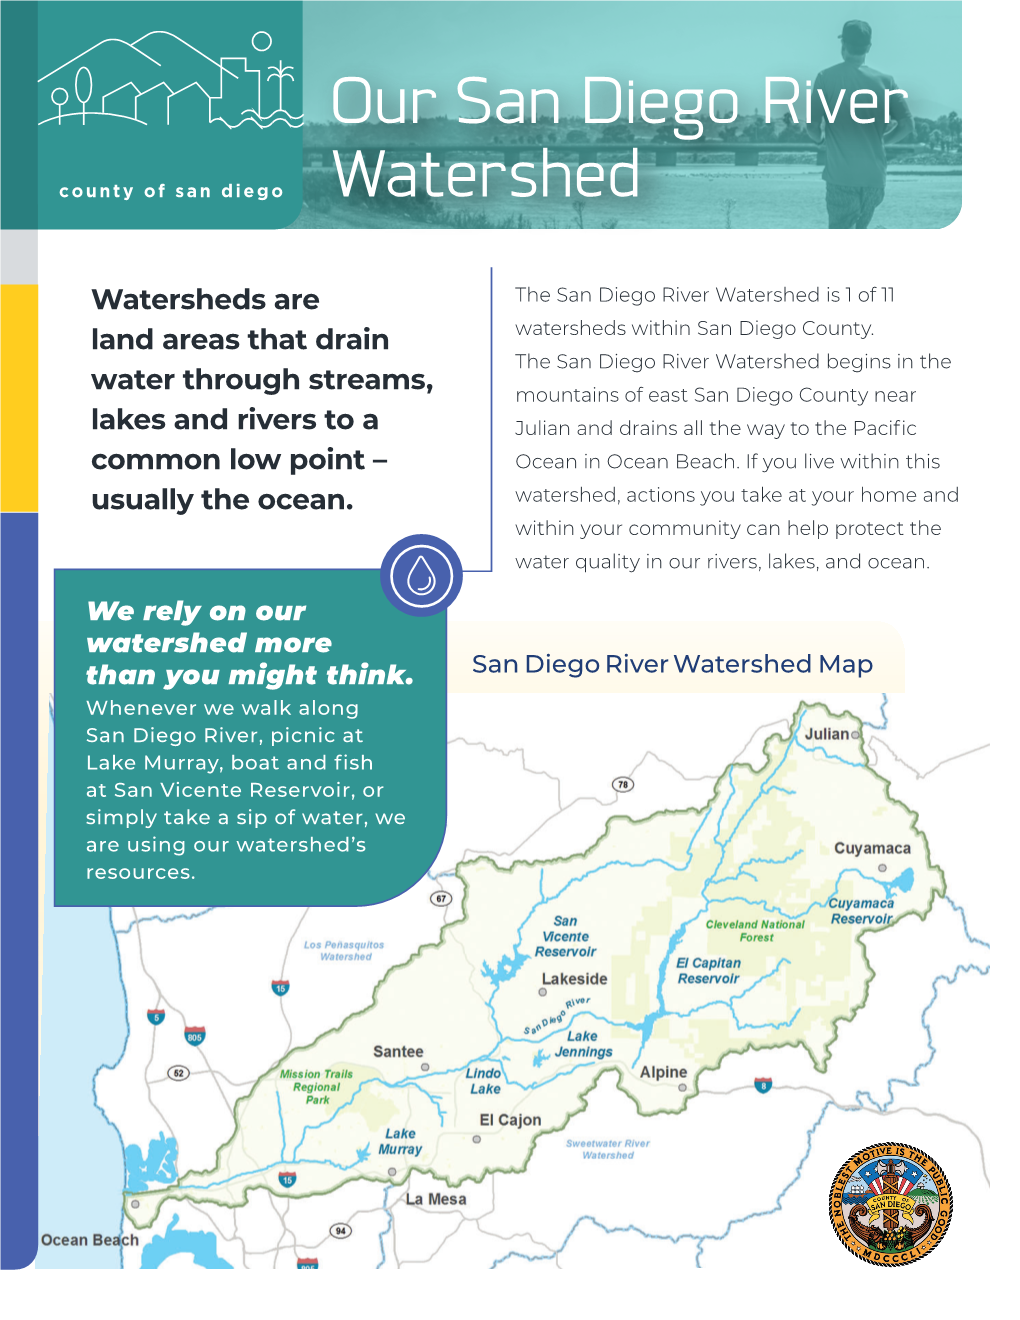 Our San Diego River Watershed